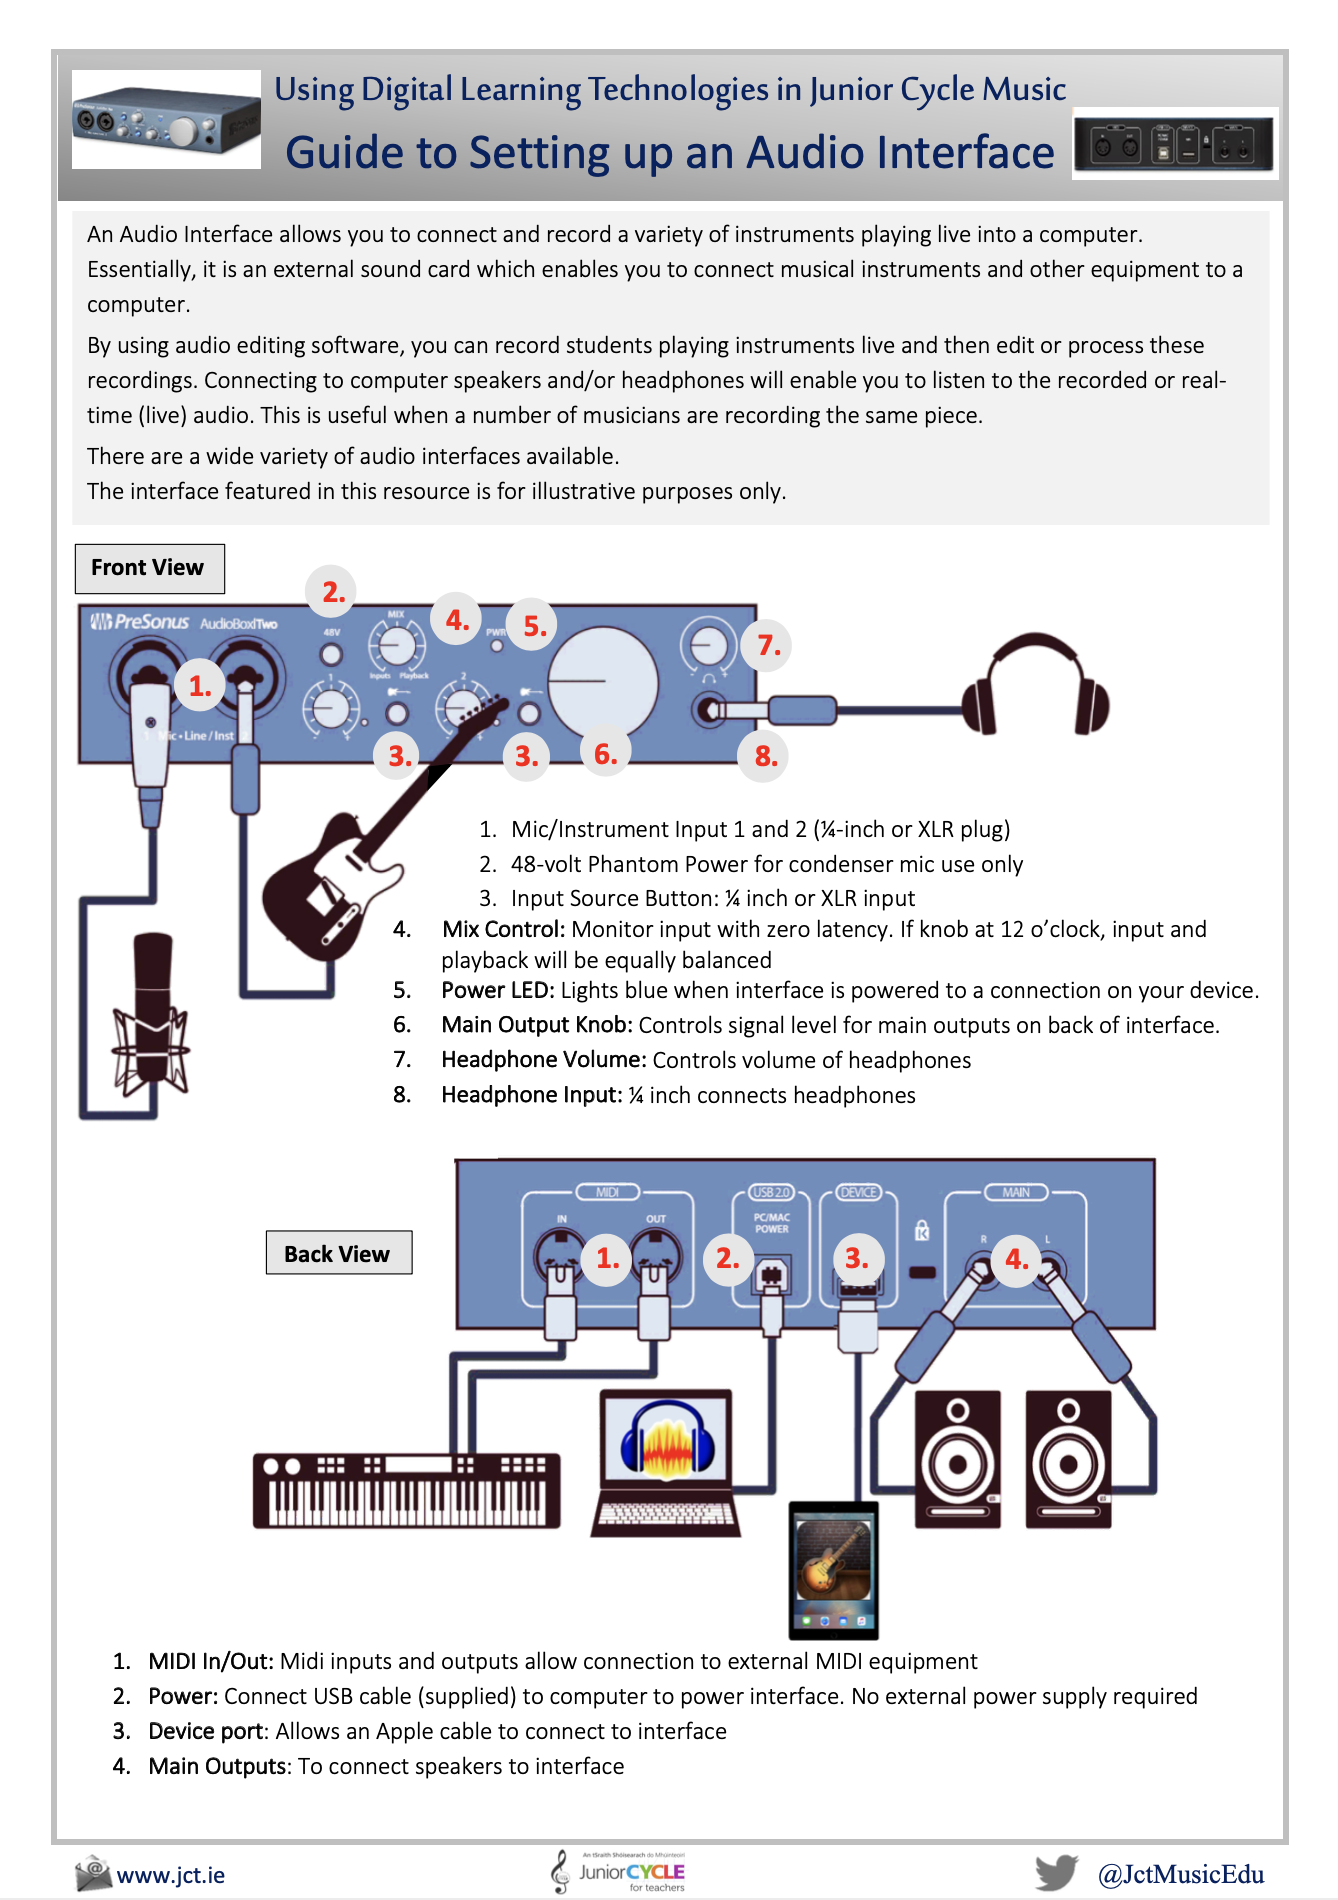 Guide to Setting up an Audio Interface